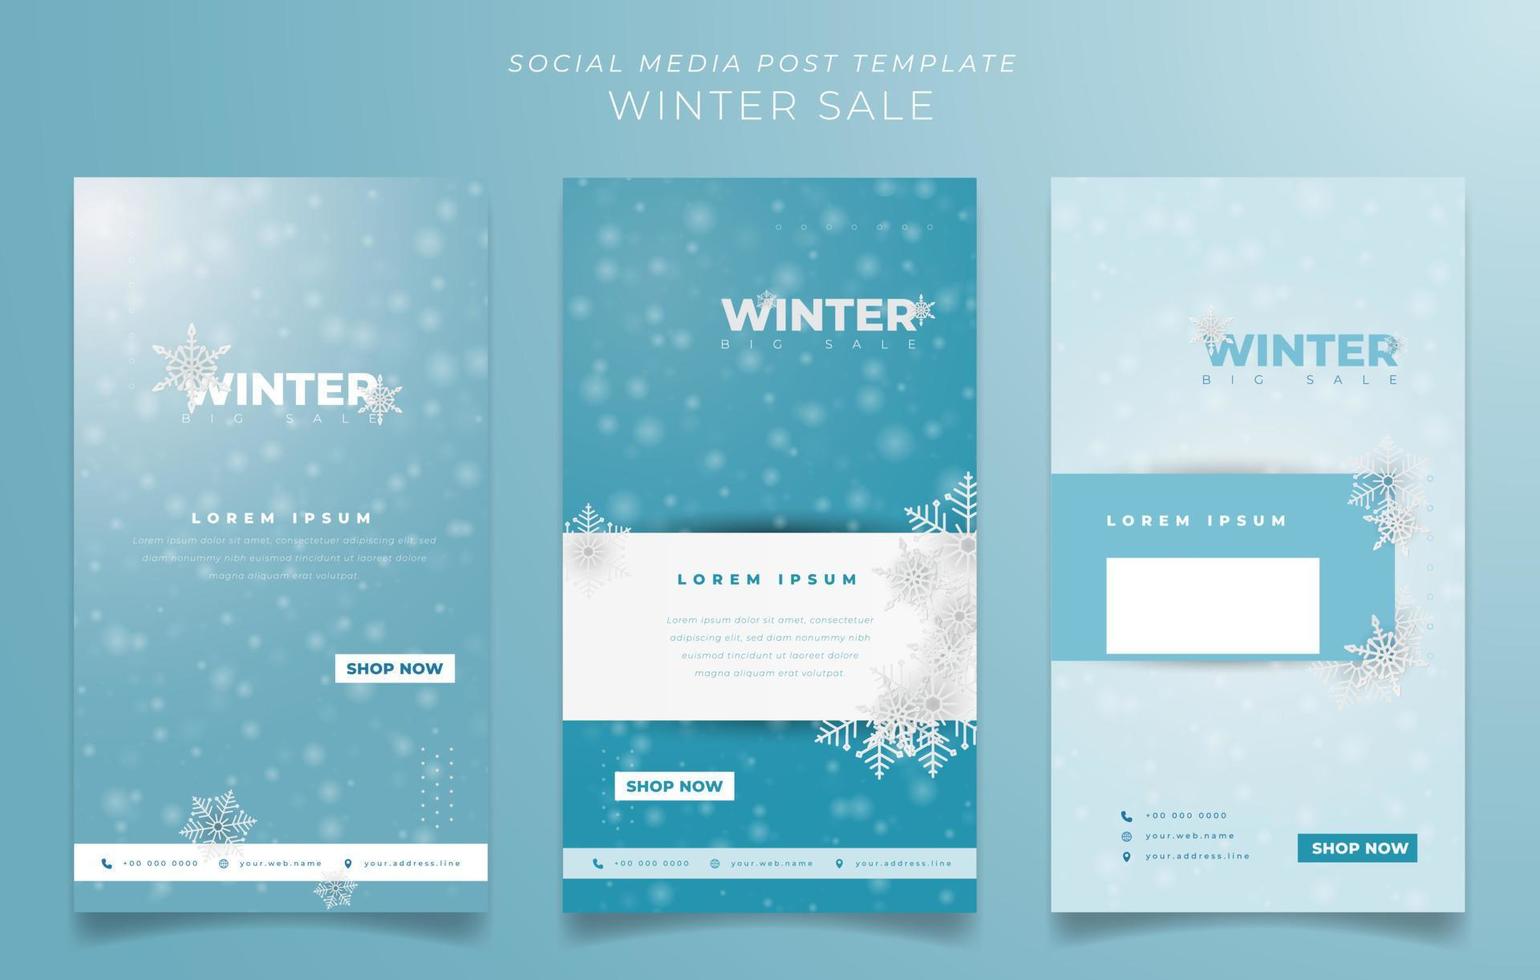 Set of social media post template for winter sale design with white and blue background design vector